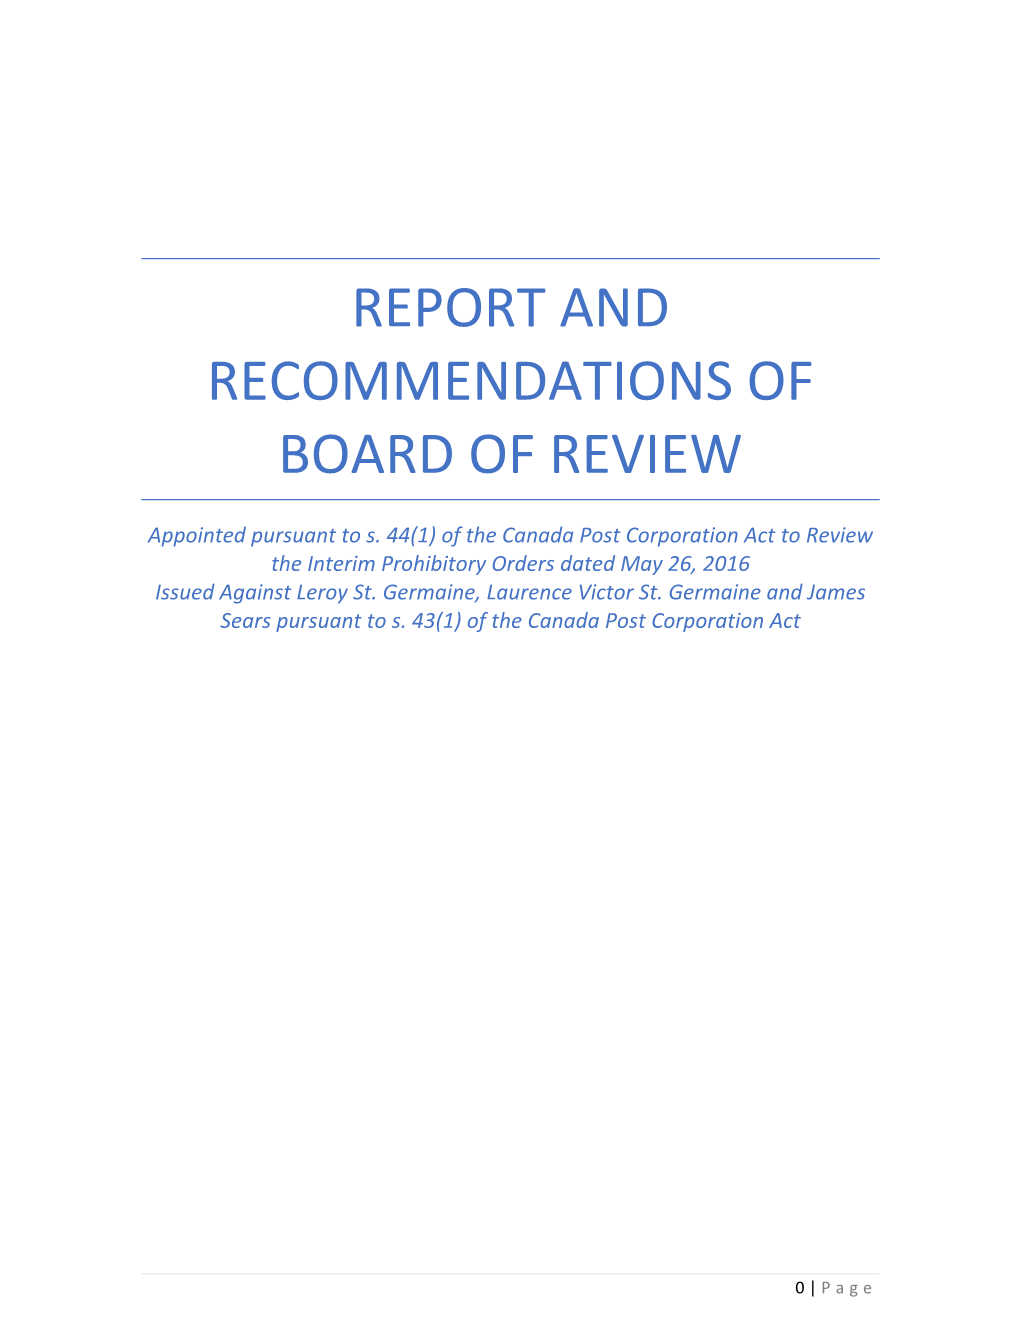 Report and Recommendations of Board of Review